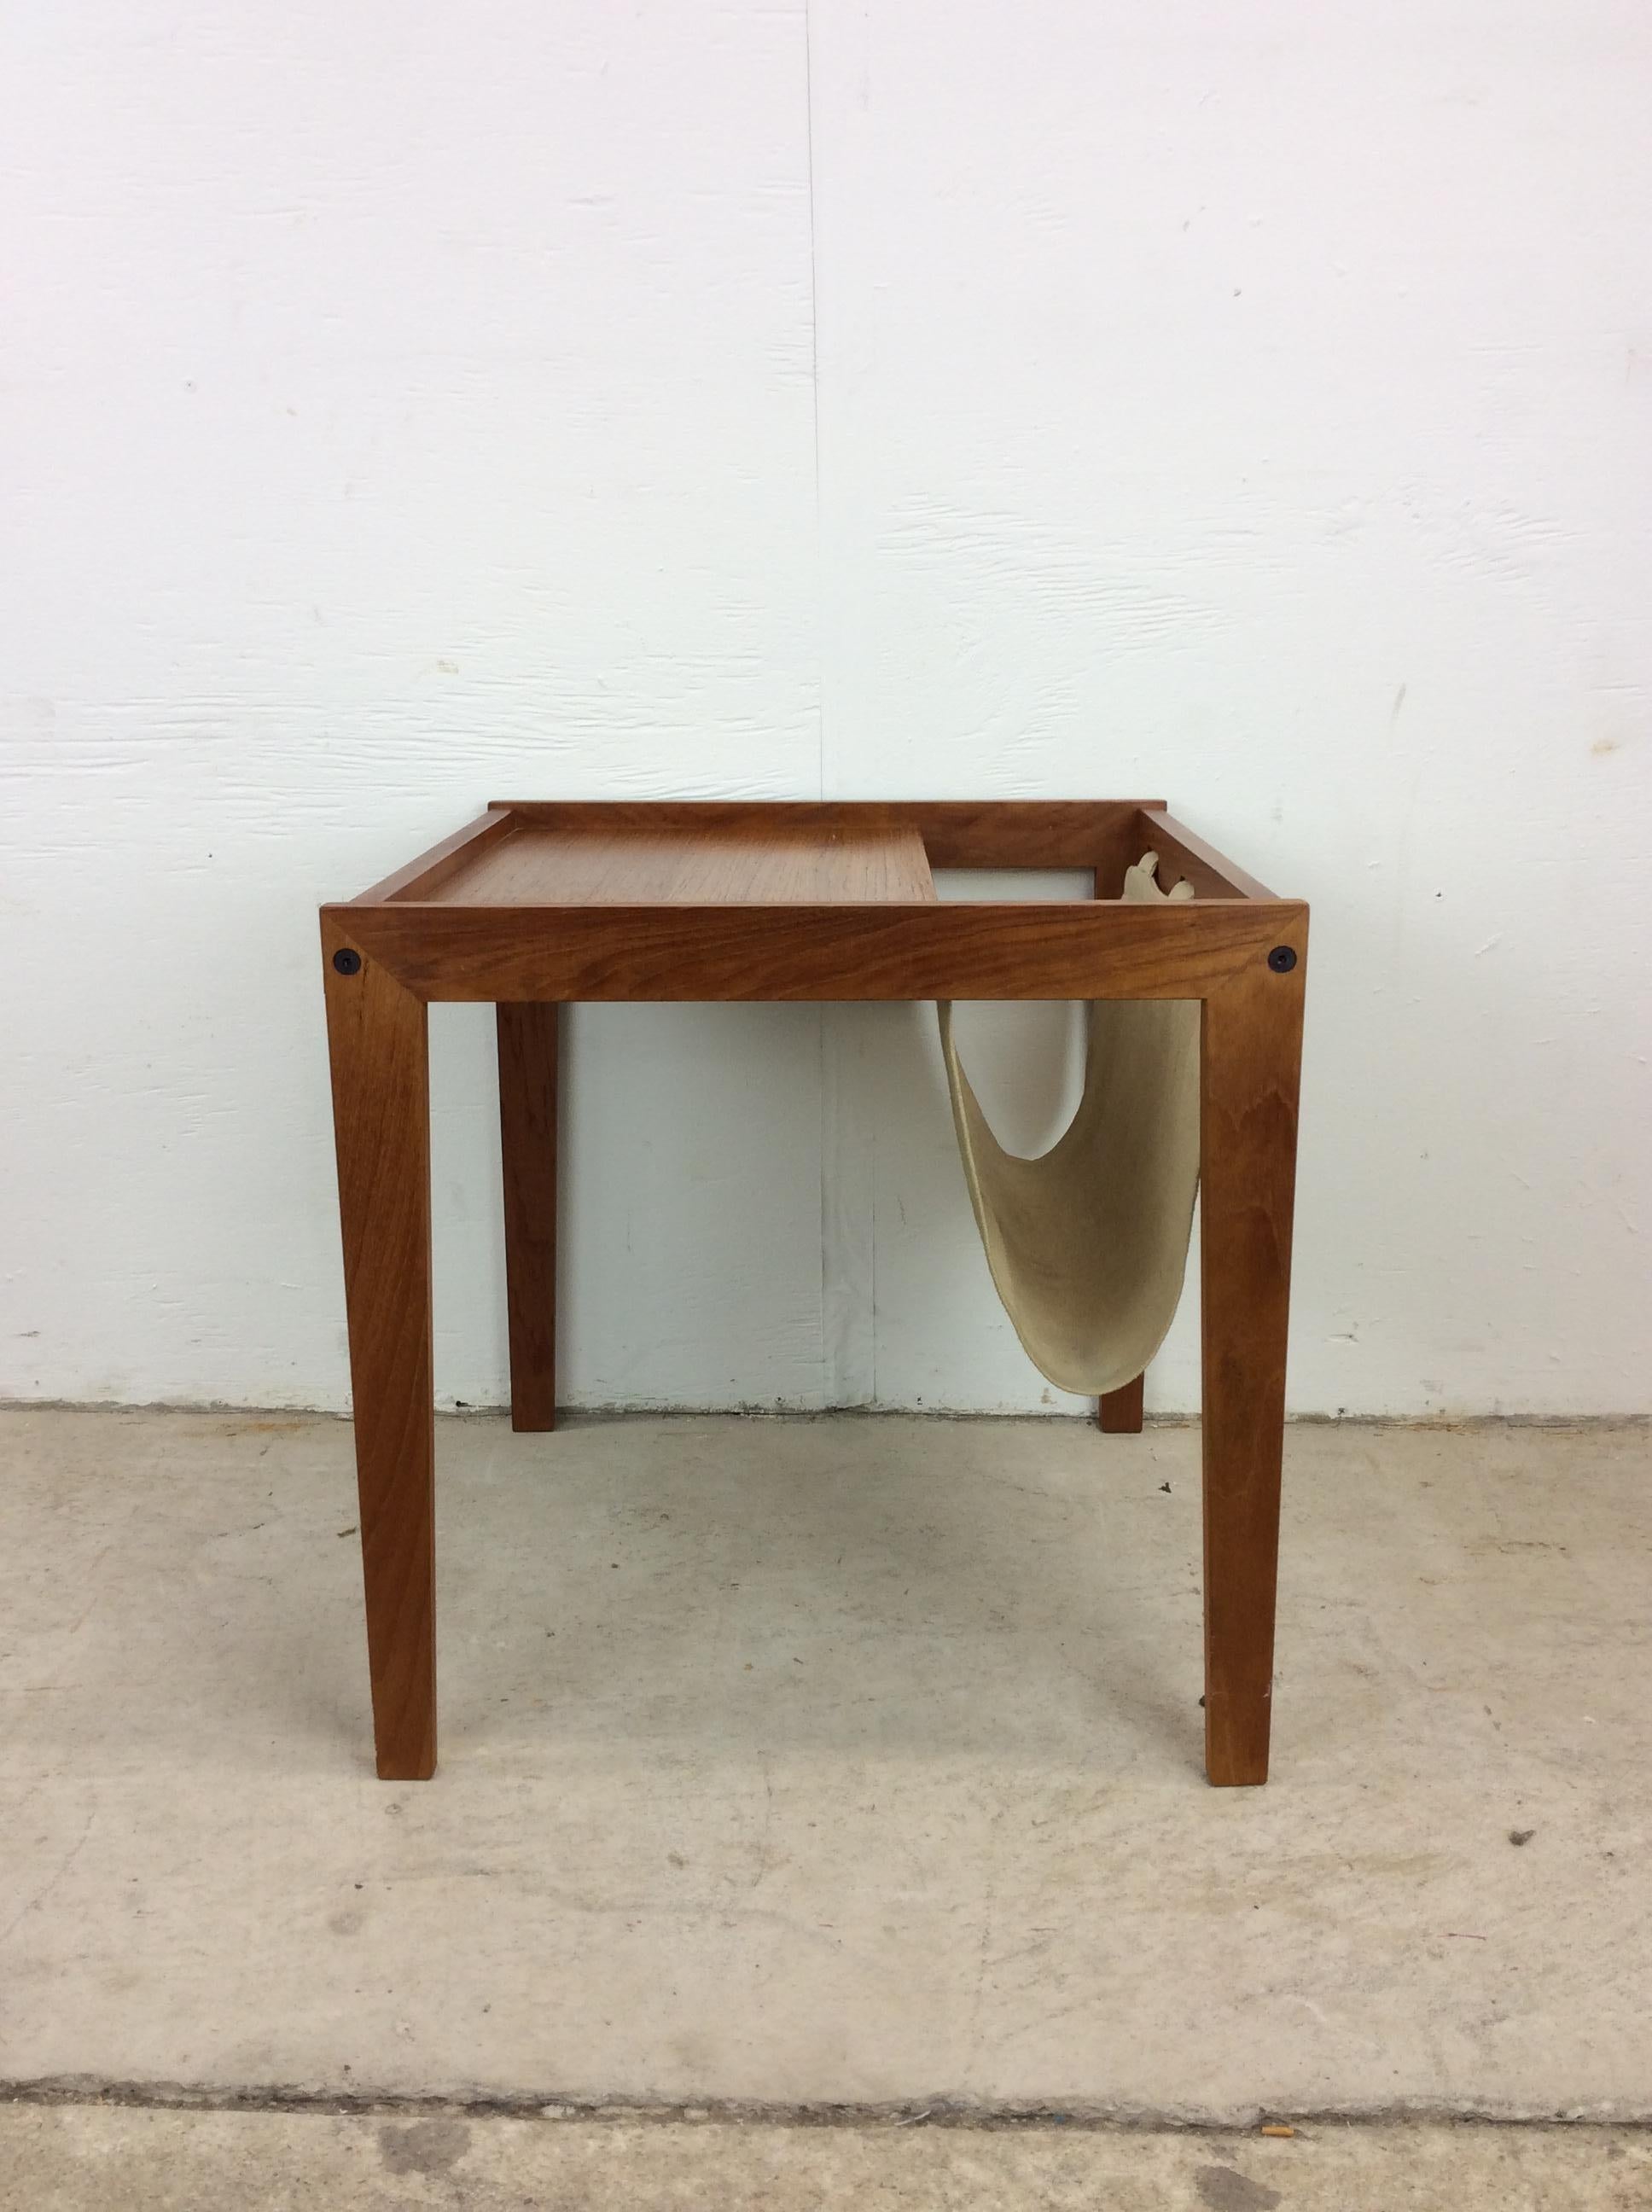 This Danish Modern table features solid teak construction with canvas sling magazine holder and tall tapered legs.

Please check out our other Danish Modern teak listings!

Dimensions: 18w 18d 18h

Condition: Original finish is in excellent